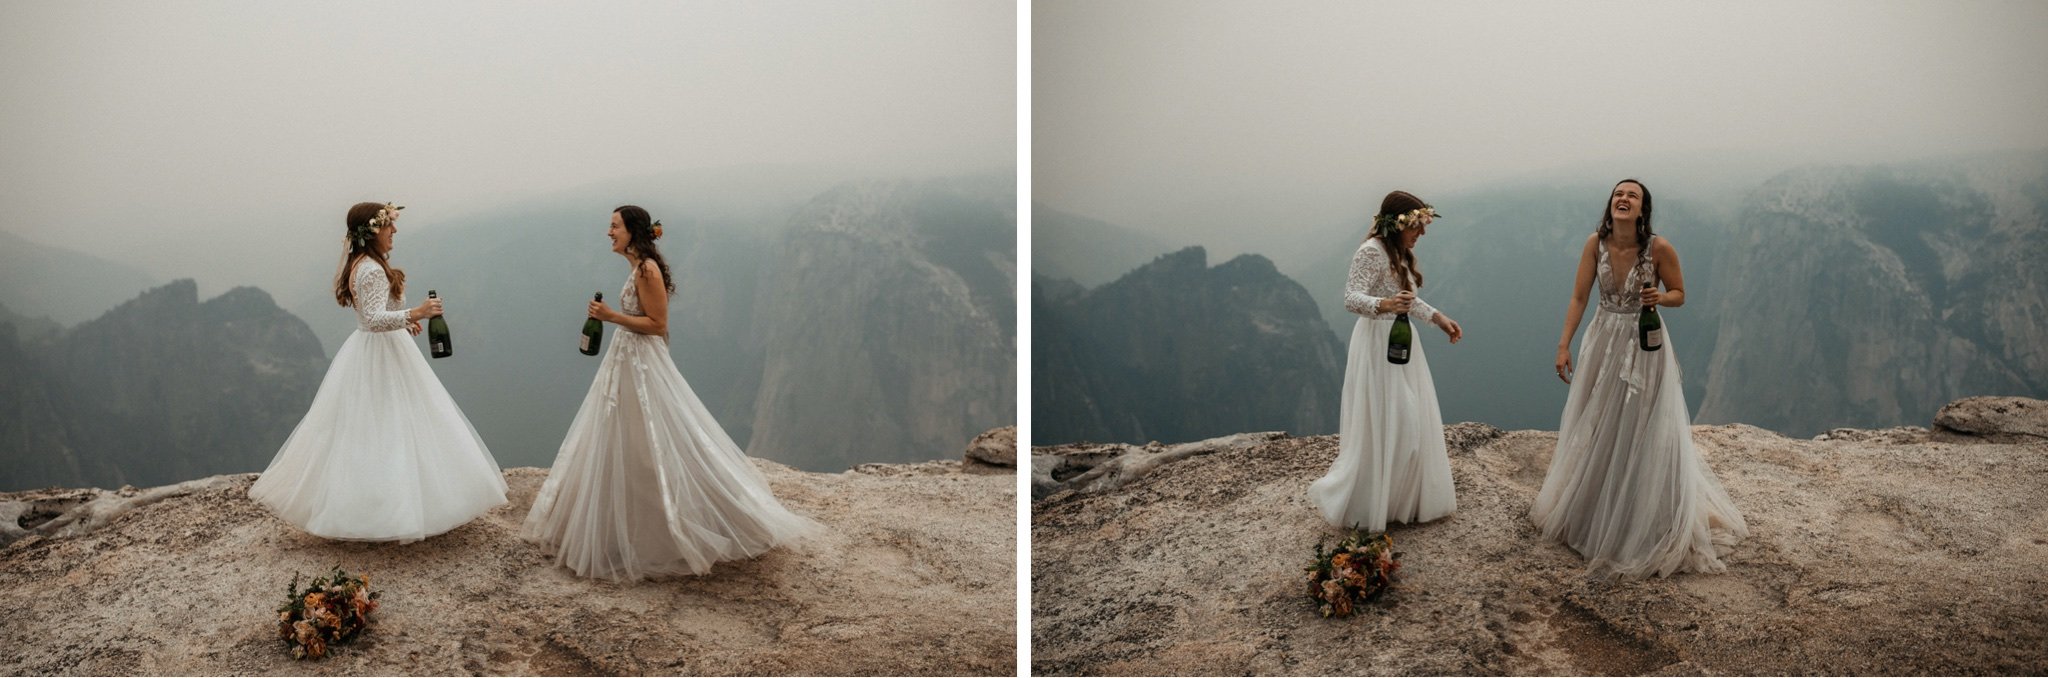 Yosemite National Park Elopement with Two Brides-Will Khoury46.jpg